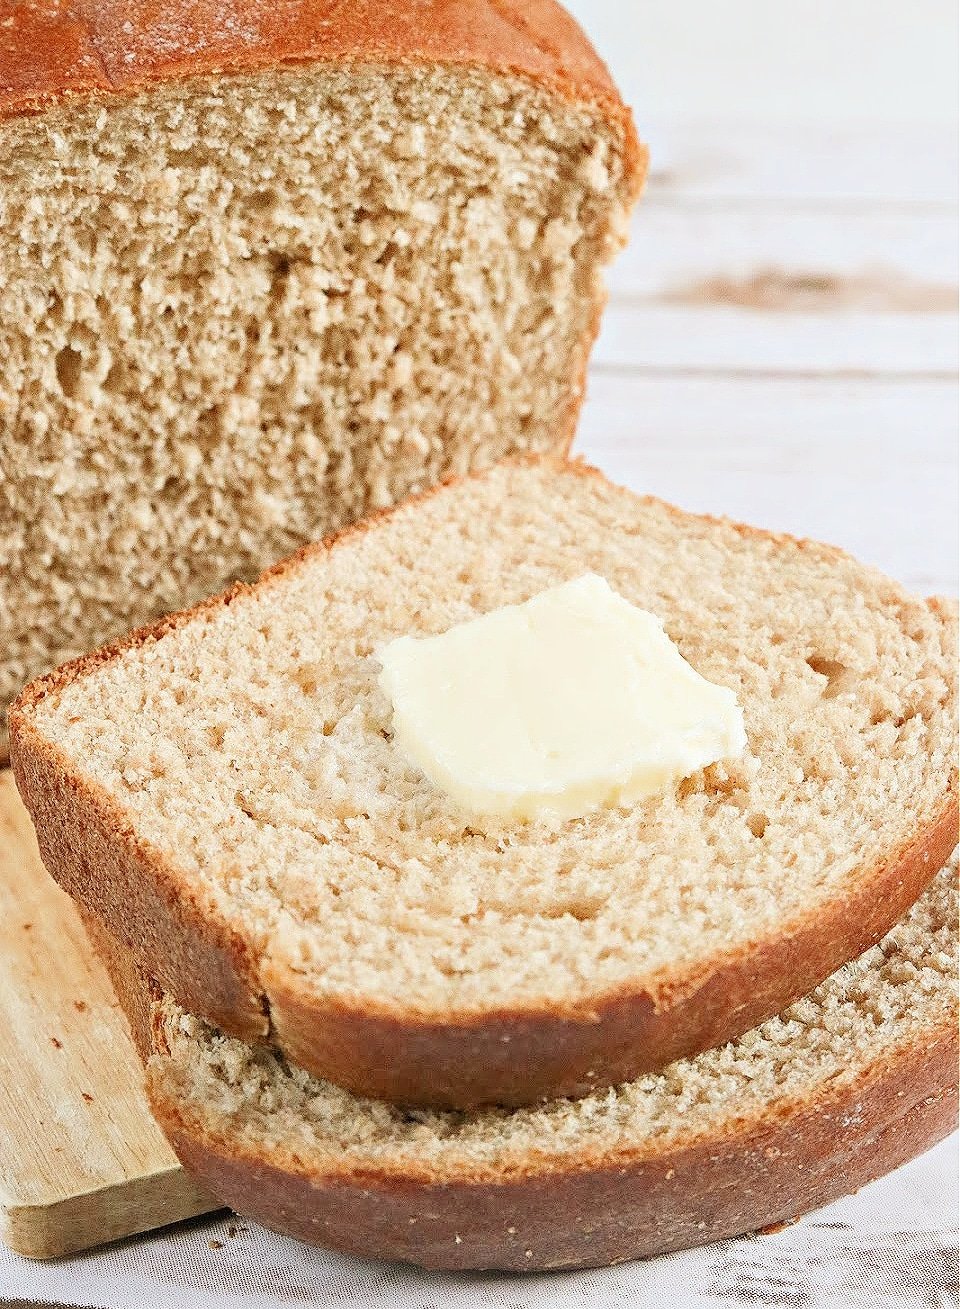 Large Batch Wheat Bread recipe that makes 4 loaves of perfect honey wheat bread every single time. I love homemade bread and this recipe is the most foolproof (and delicious) wheat bread recipe that I've ever tried. 